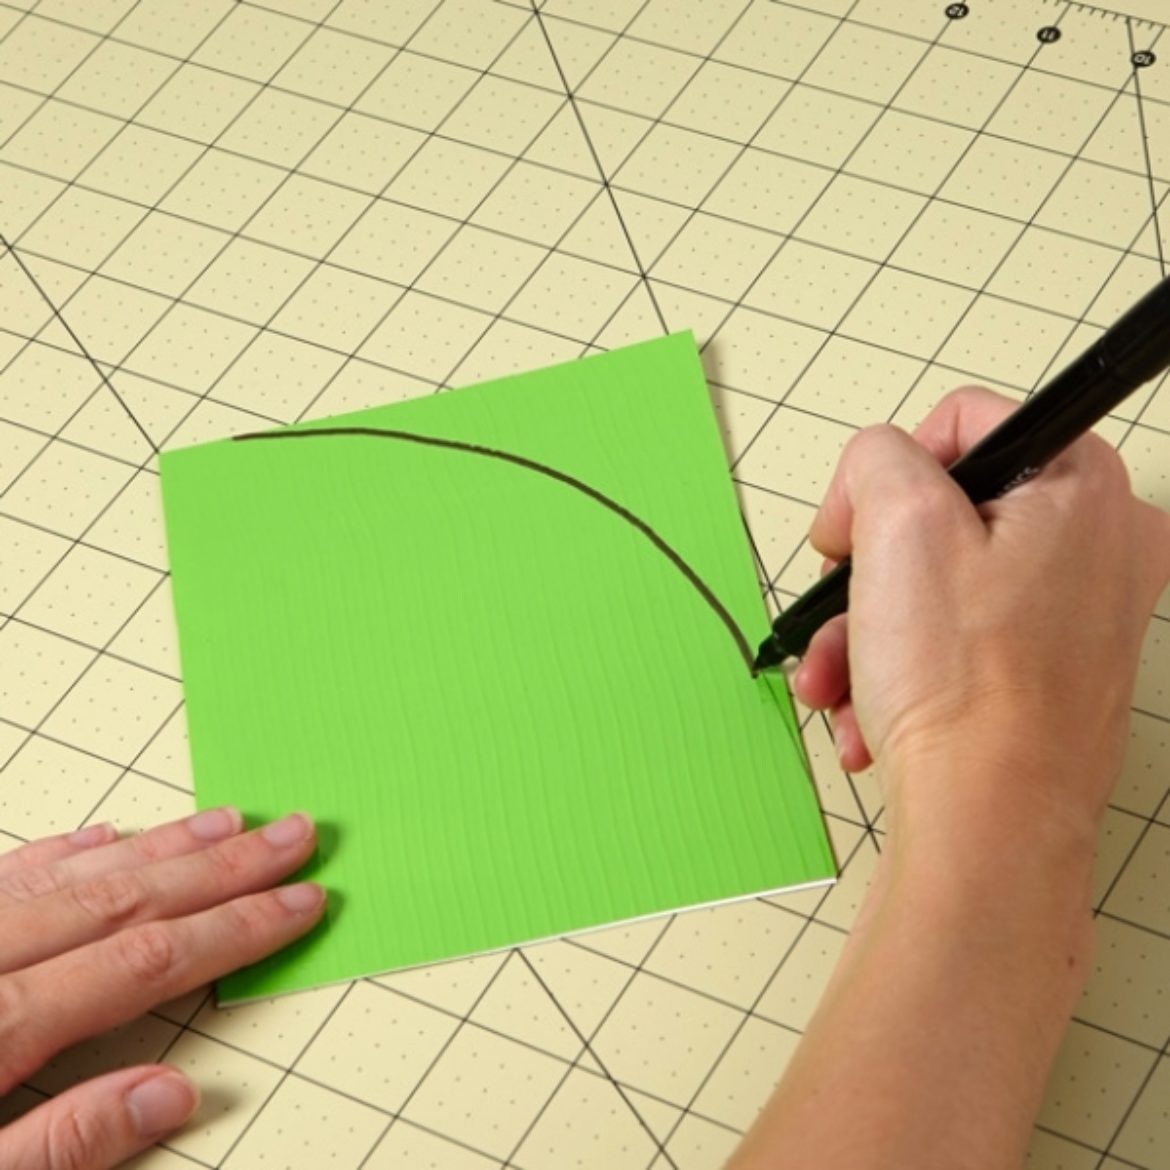 Curve being drawn on folded Duck Tape fabric